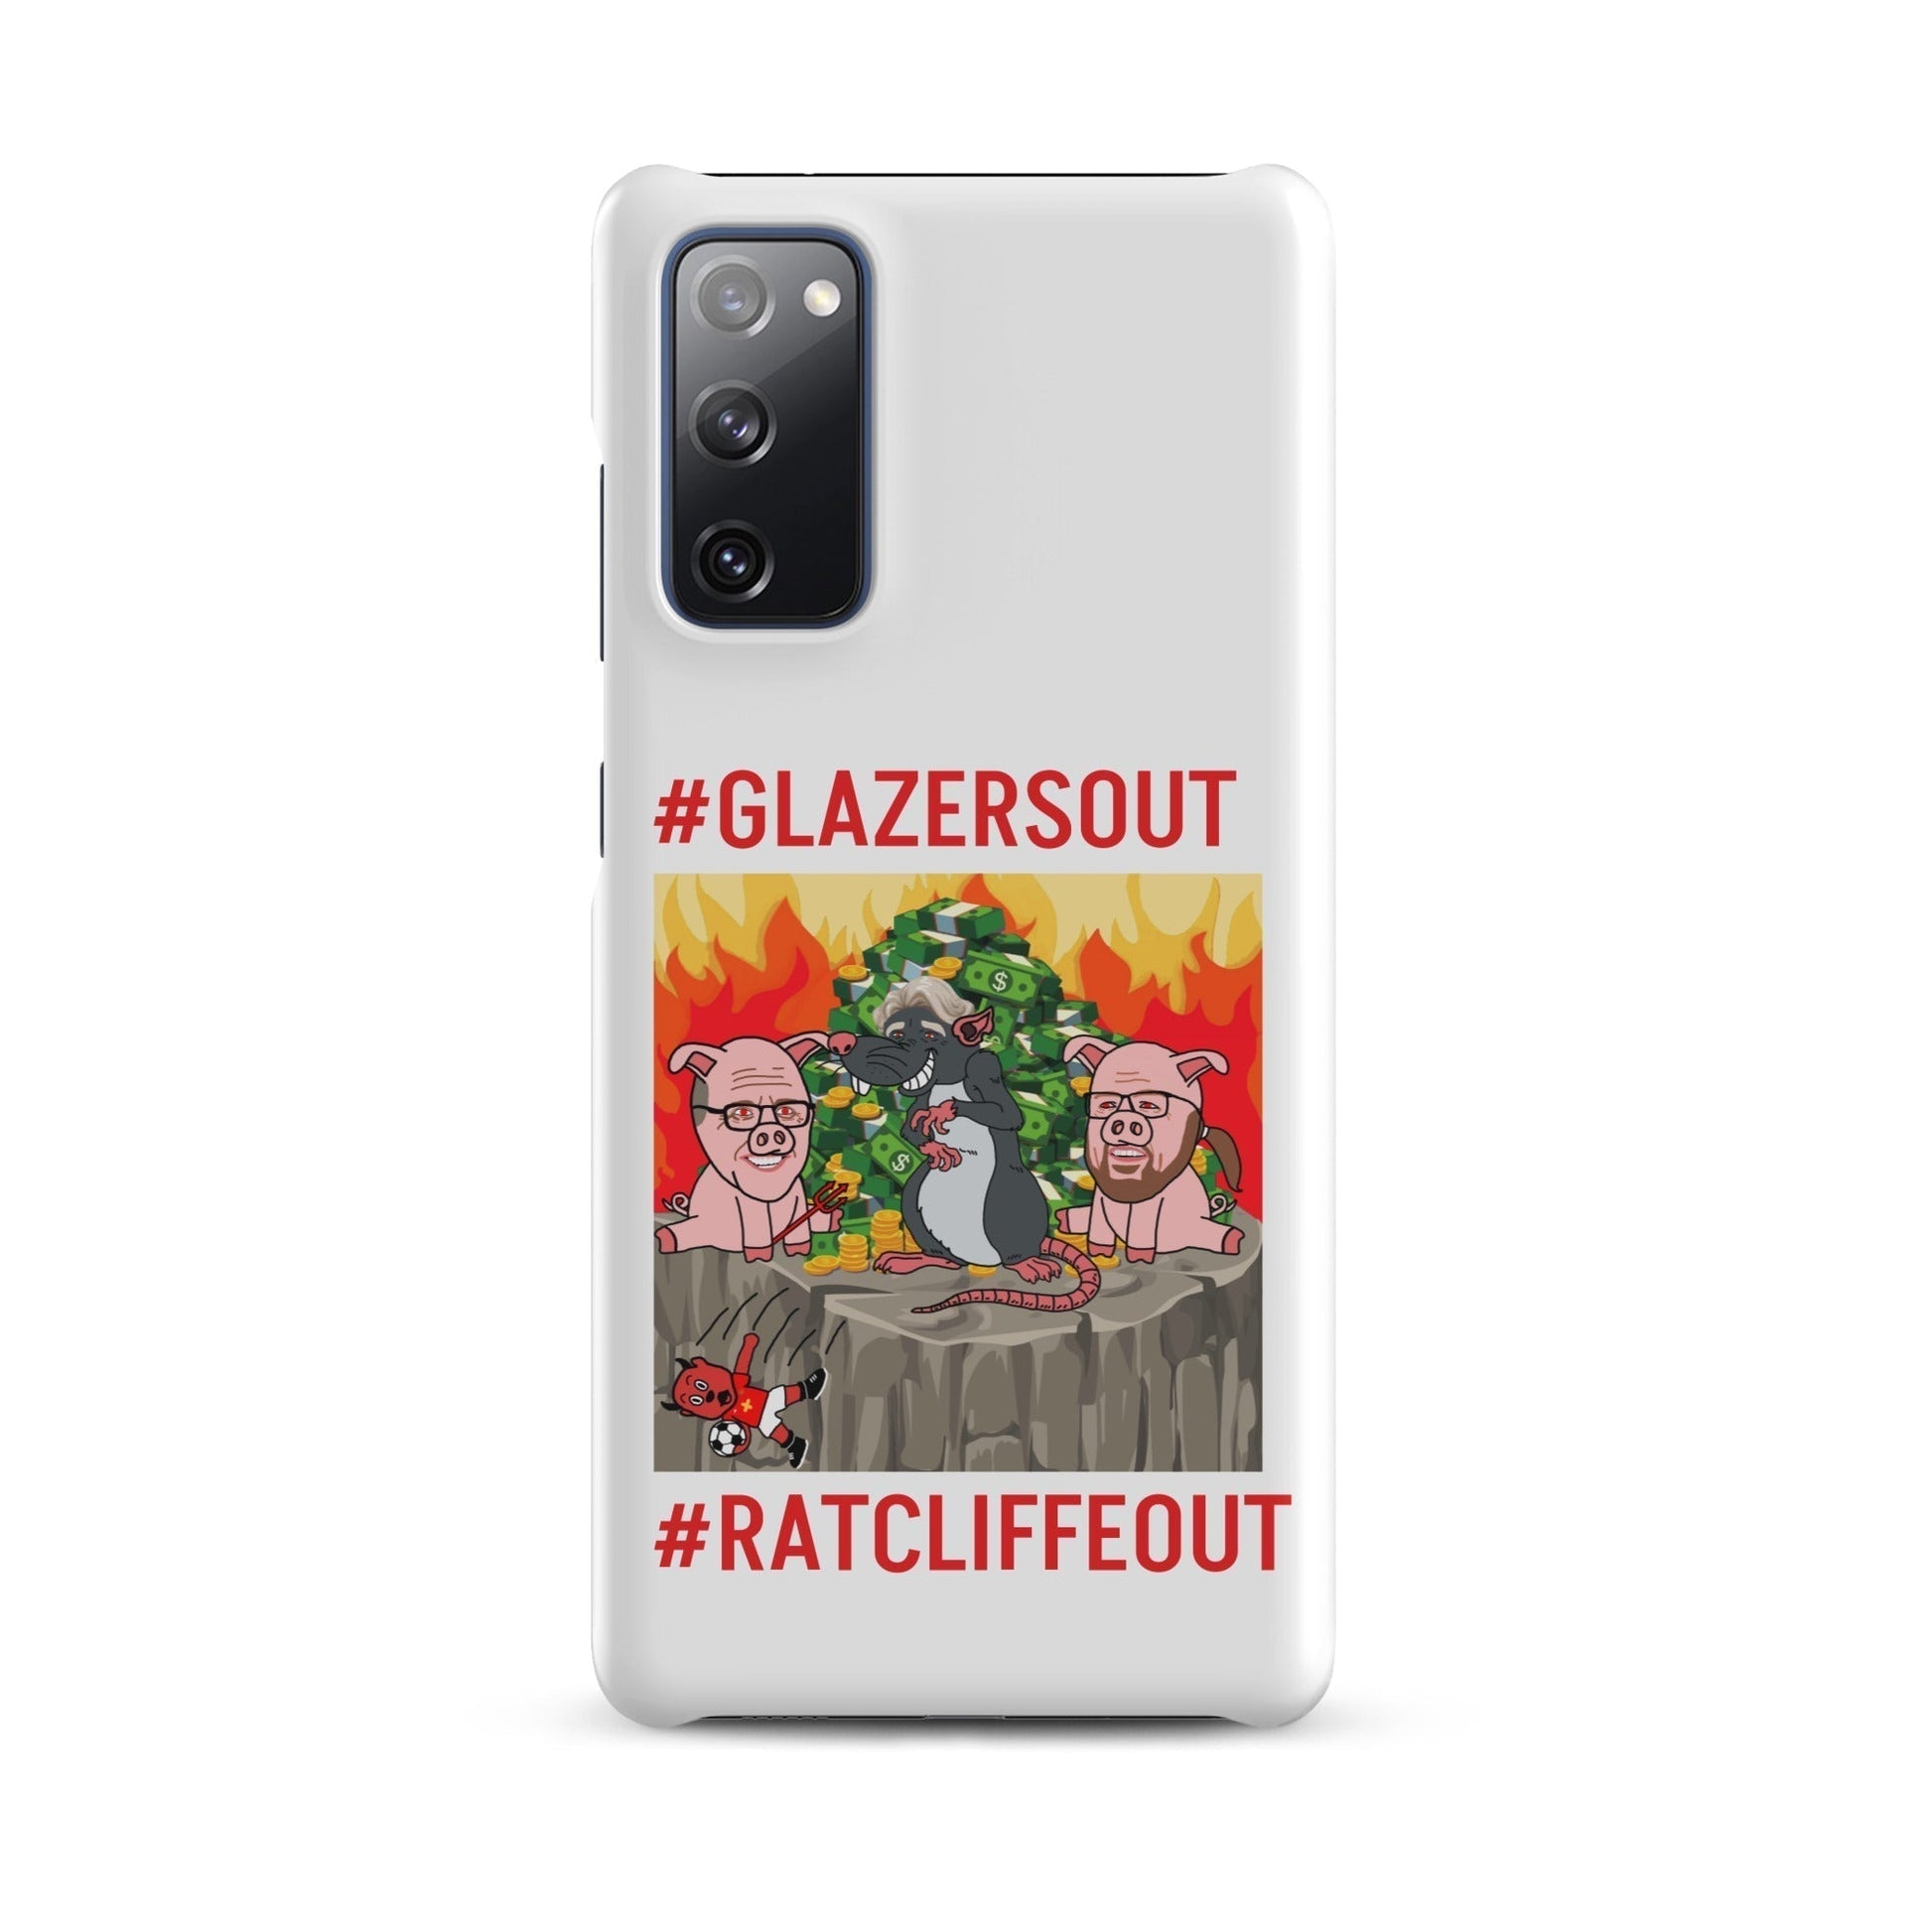 Manchester United Ratcliffe Out, Glazers Out Phone Snap Case for Samsung® Next Cult Brand Football, GlazersOut, Manchester United, RatcliffeOut